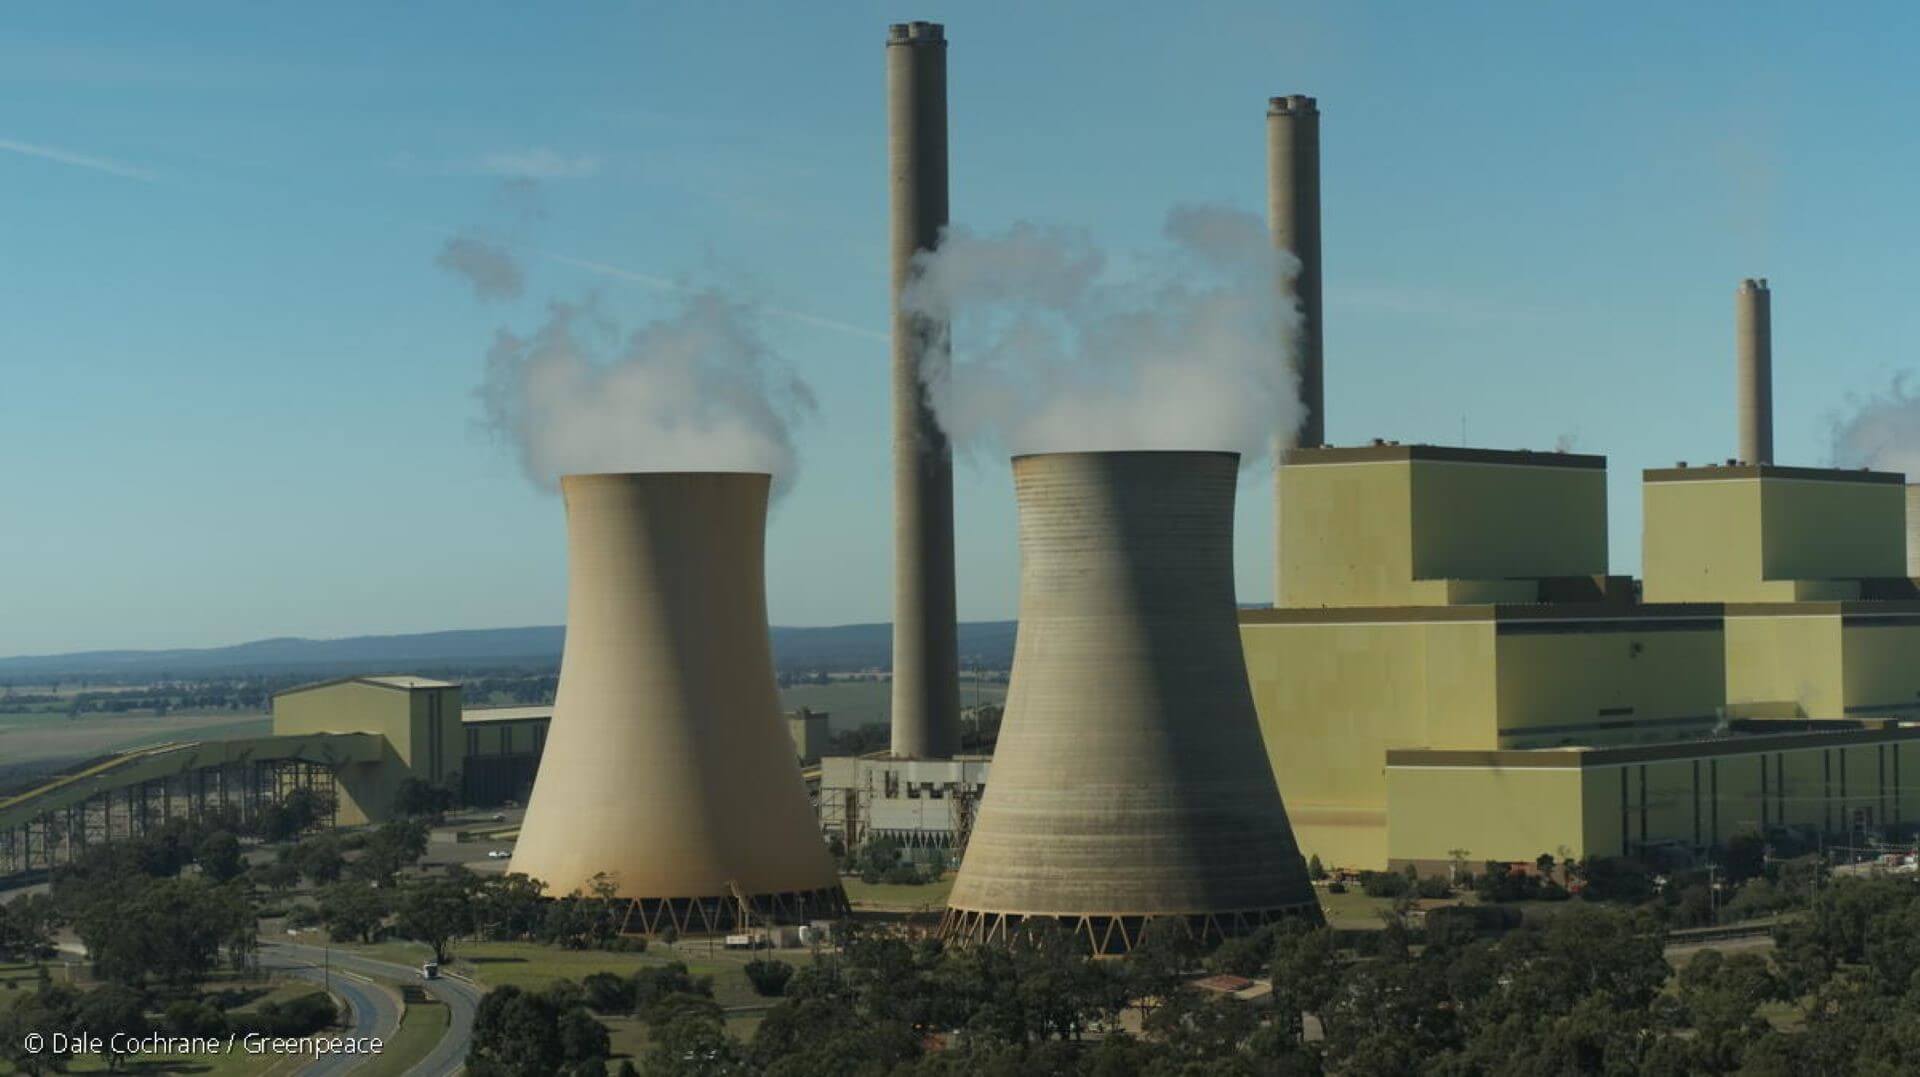 Loy Yang A, brown coal-fired thermal power station in Victoria, Australia